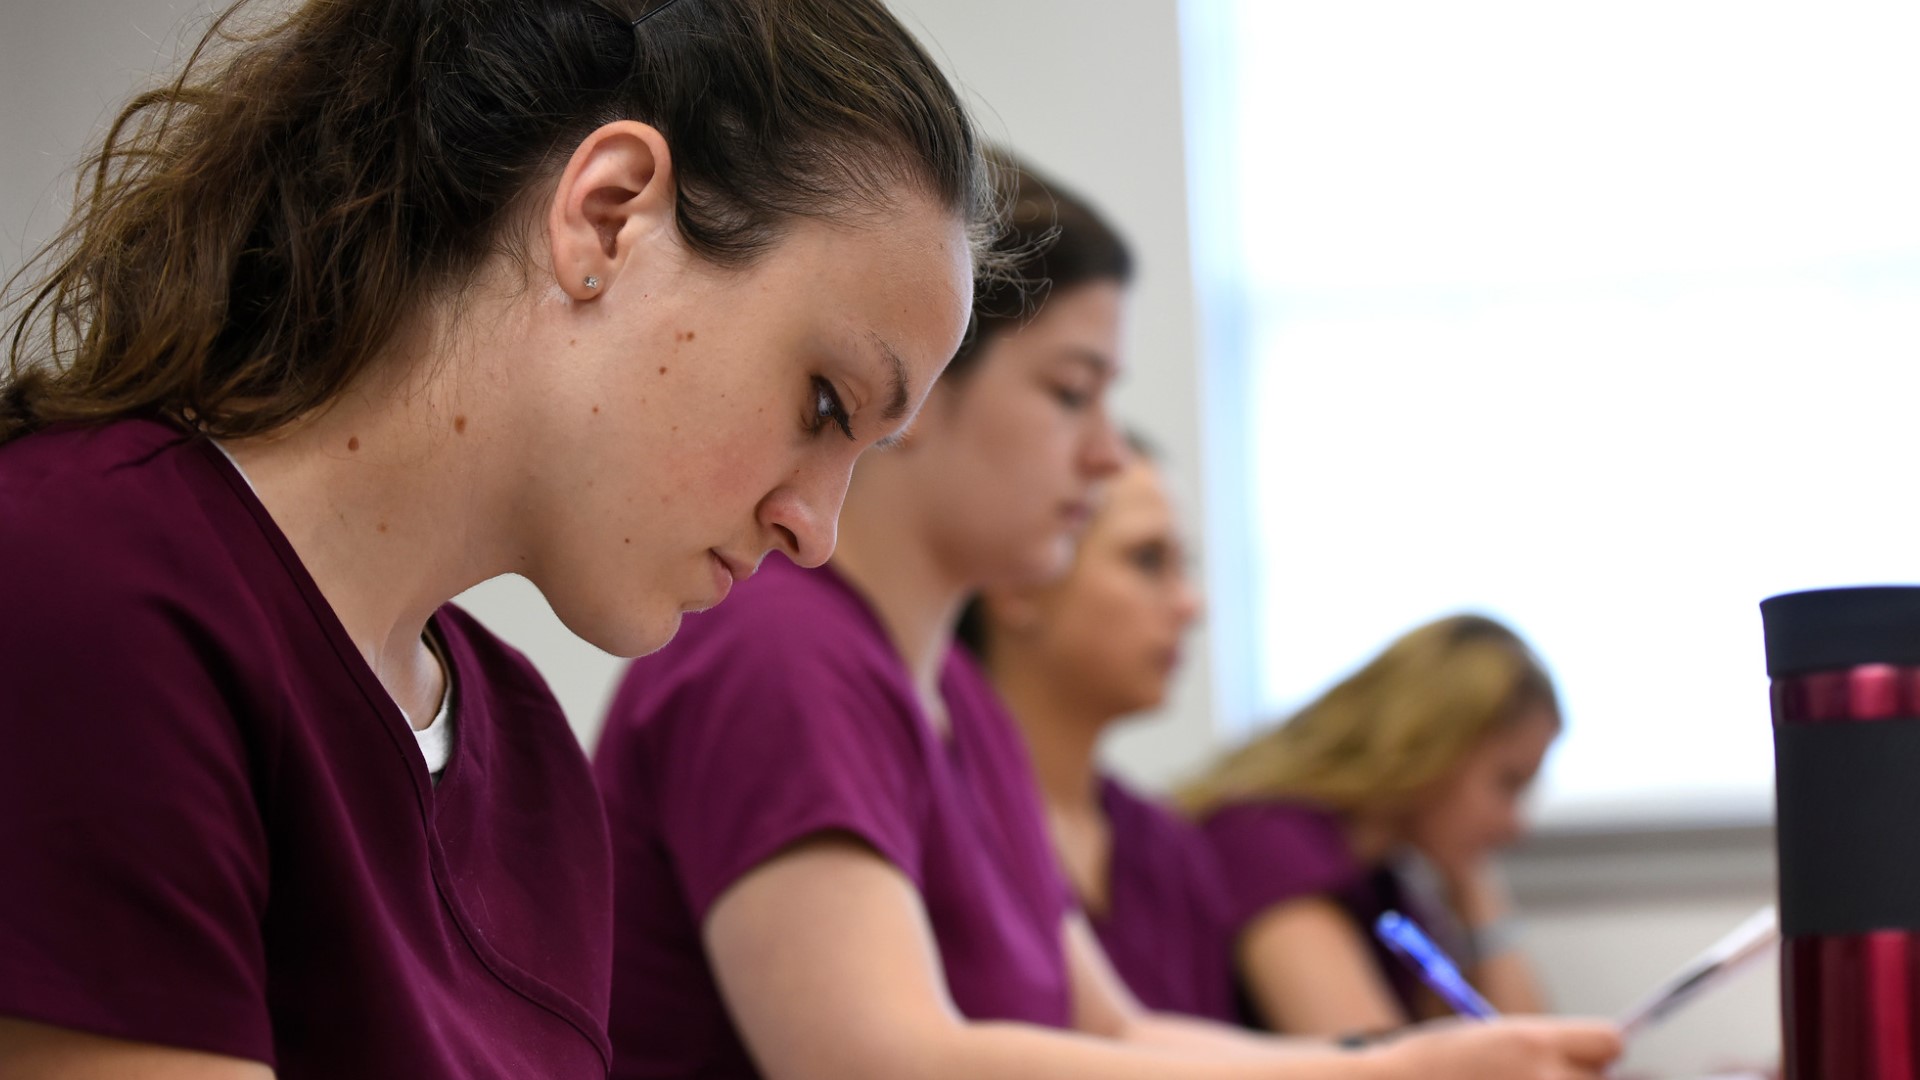 As part of this initiative, Central Penn College will offer a new 12-month, 30-credit, medical assisting diploma program.